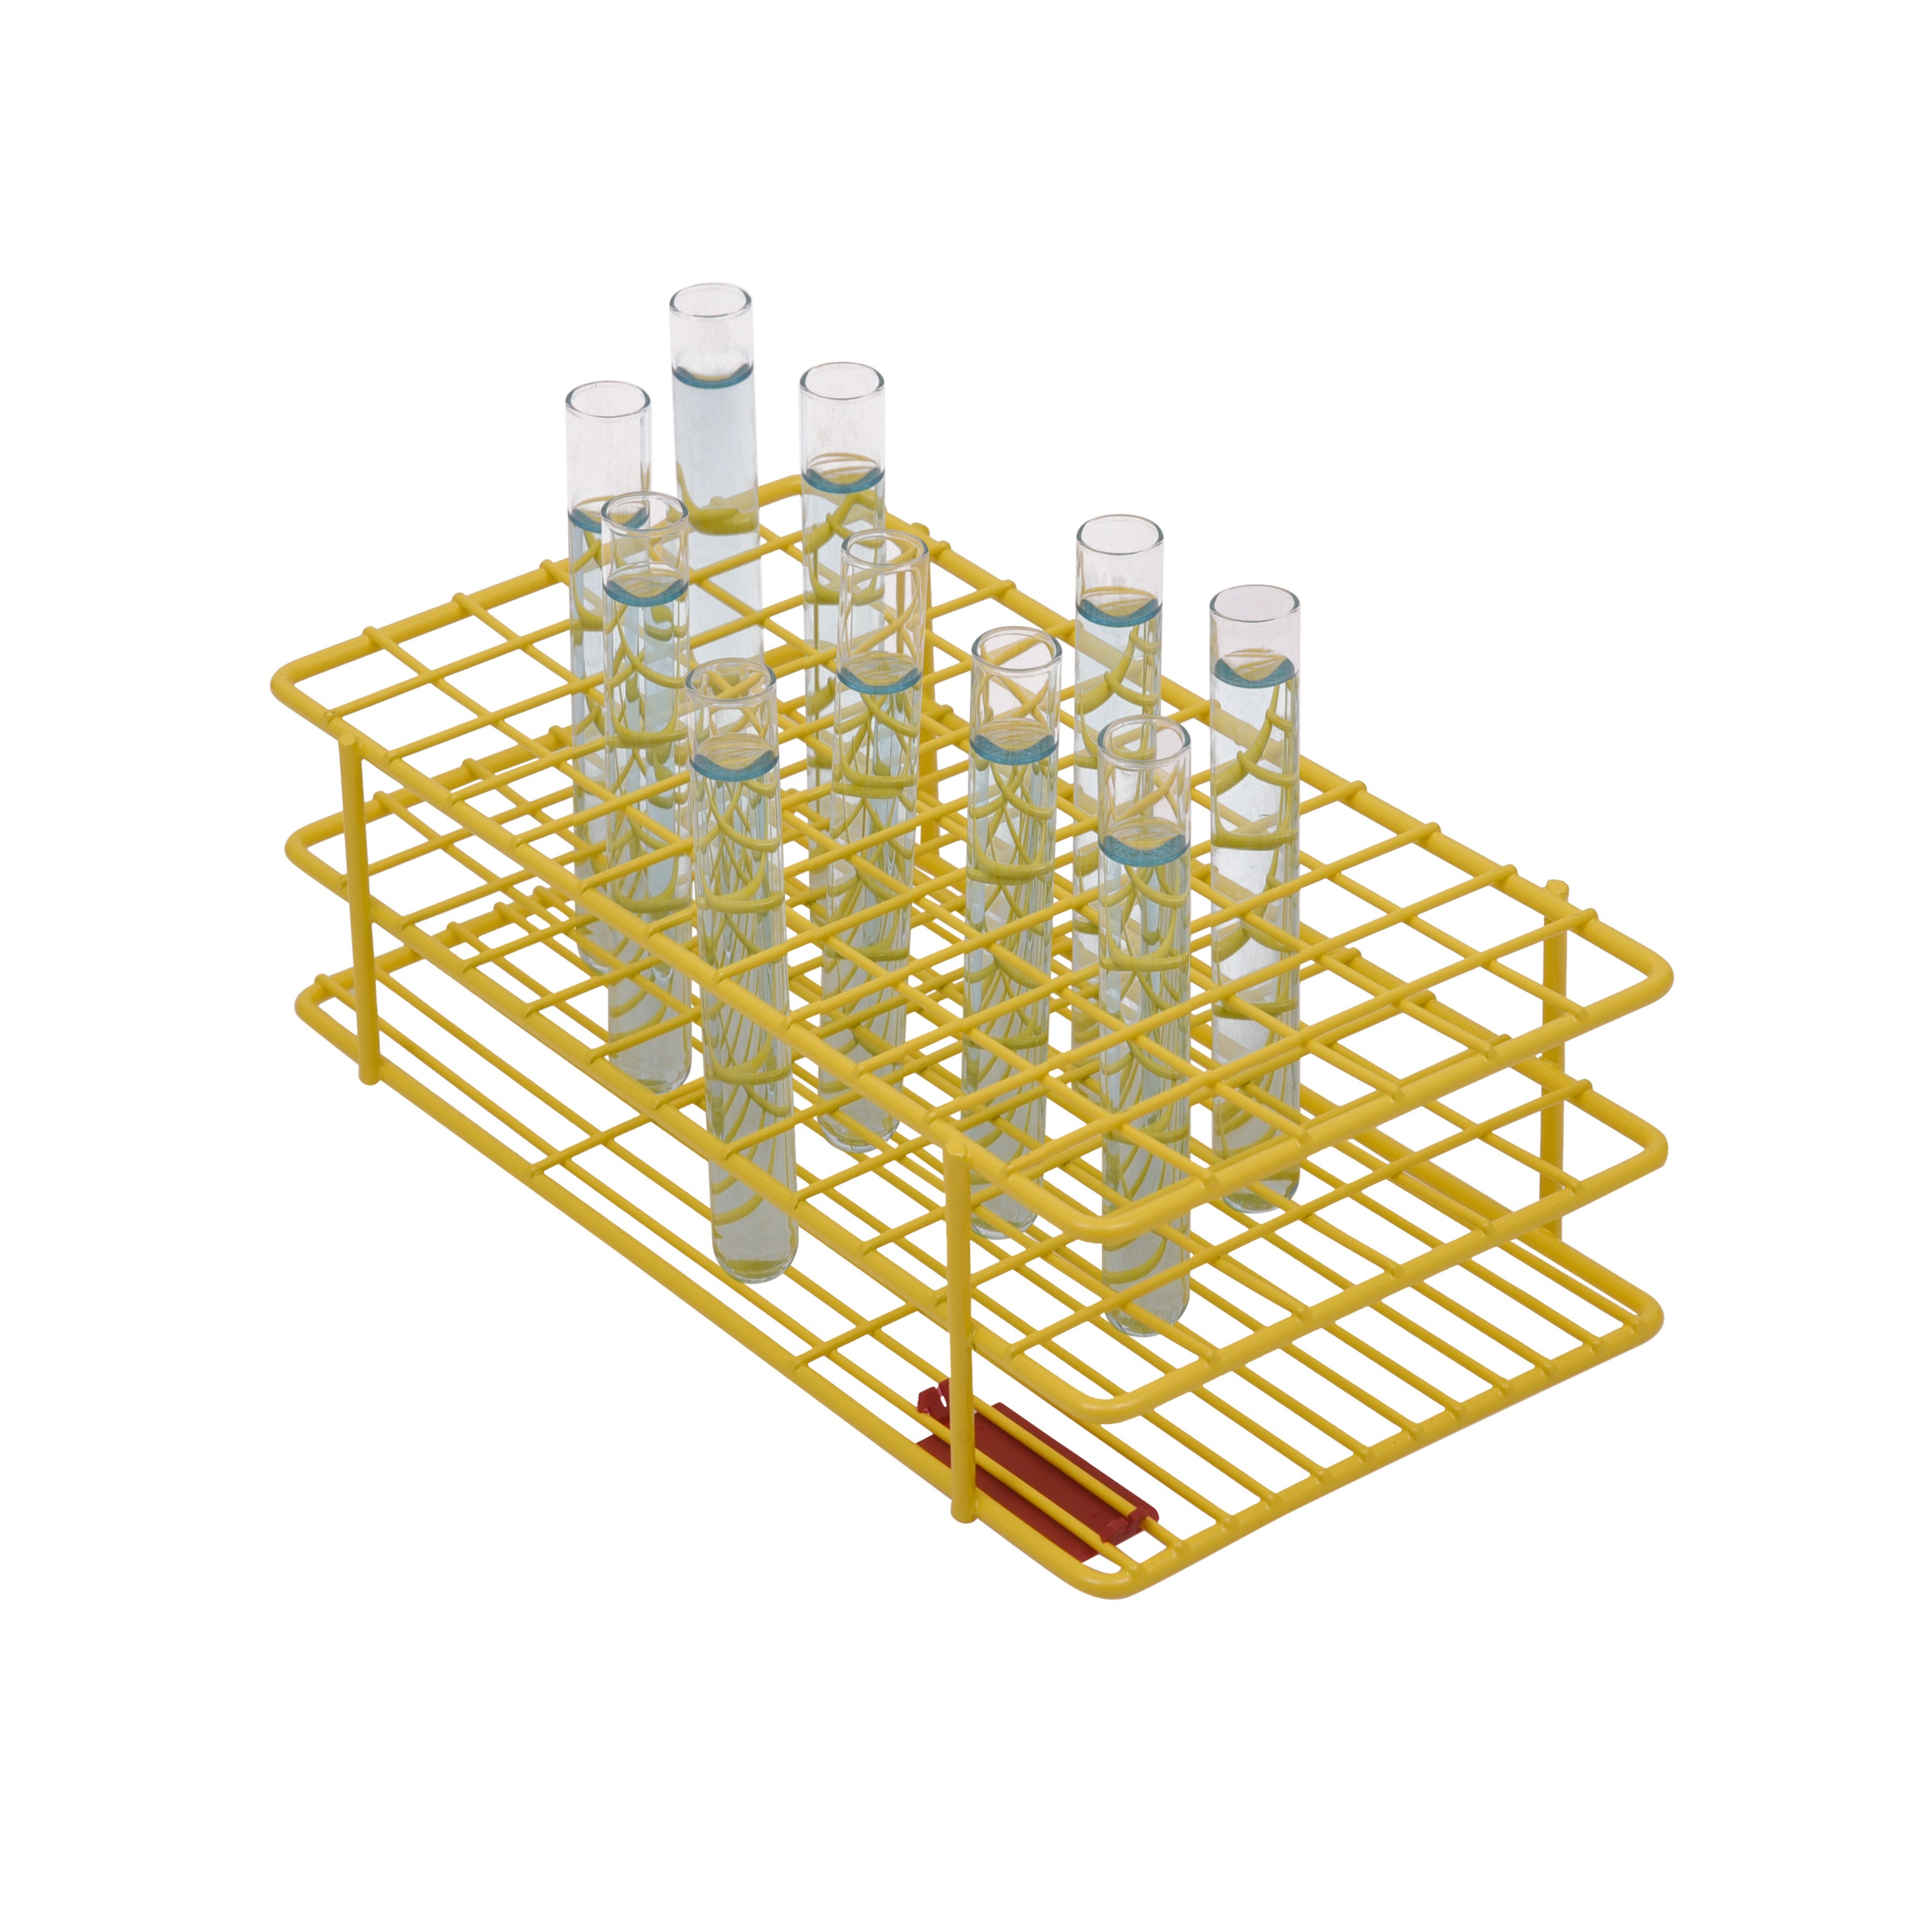 SP Bel-Art Poxygrid Test Tube Rack; For 10-13mm Tubes, 72 Places, Yellow